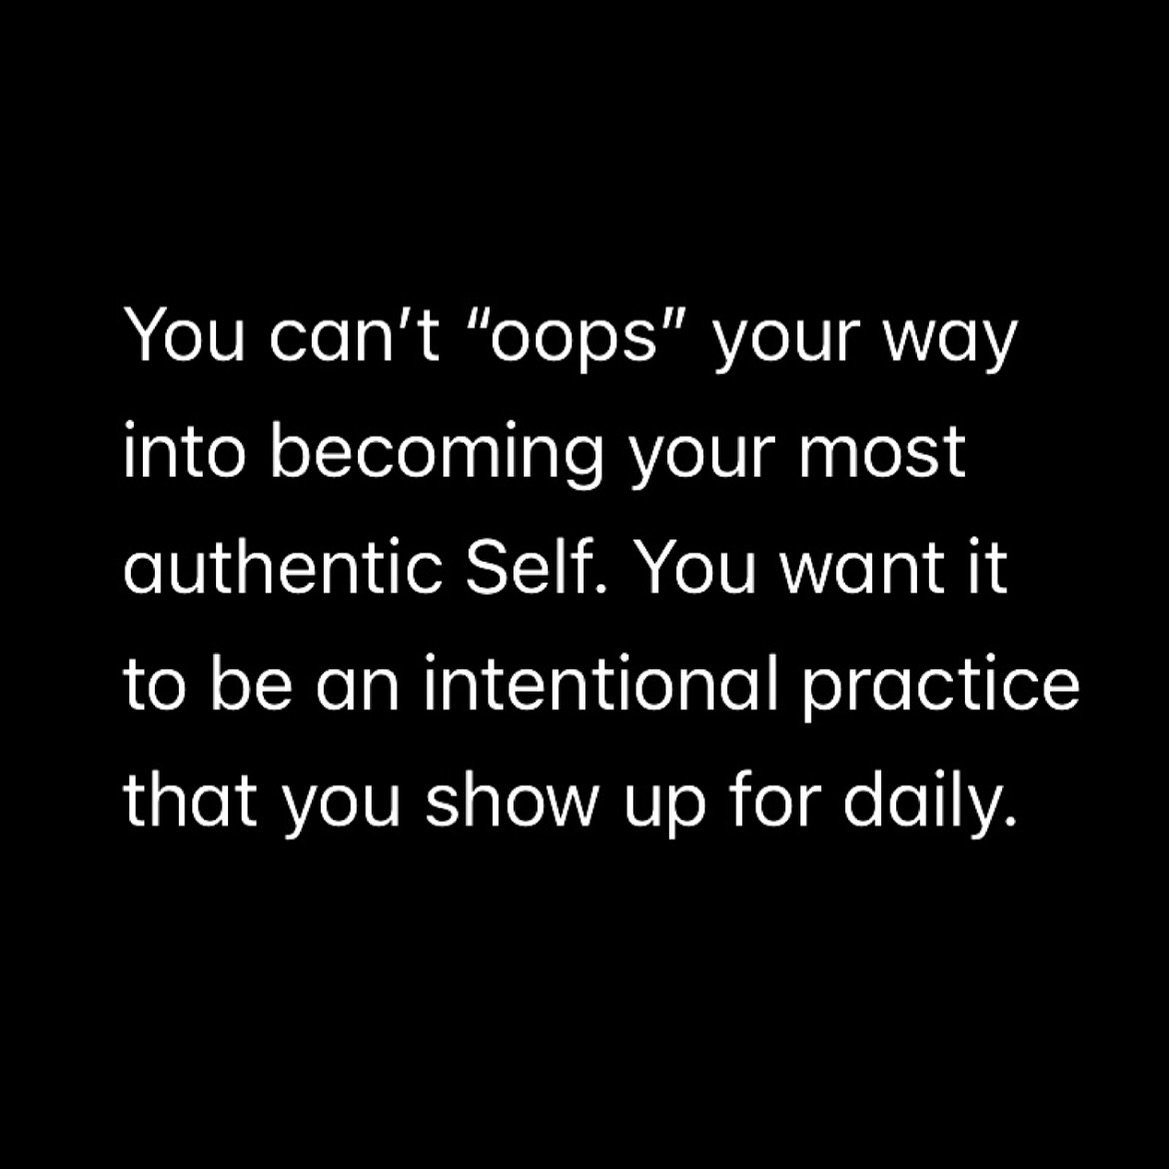 Being authentically you is only rewarded AFTER you provide something of value to the world.

Until then, you&rsquo;ll be labelled &ldquo;crazy,&rdquo; &ldquo;unrealistic,&rdquo; &ldquo;weirdo,&rdquo; etc.

But the internal payoff of being more fulfil